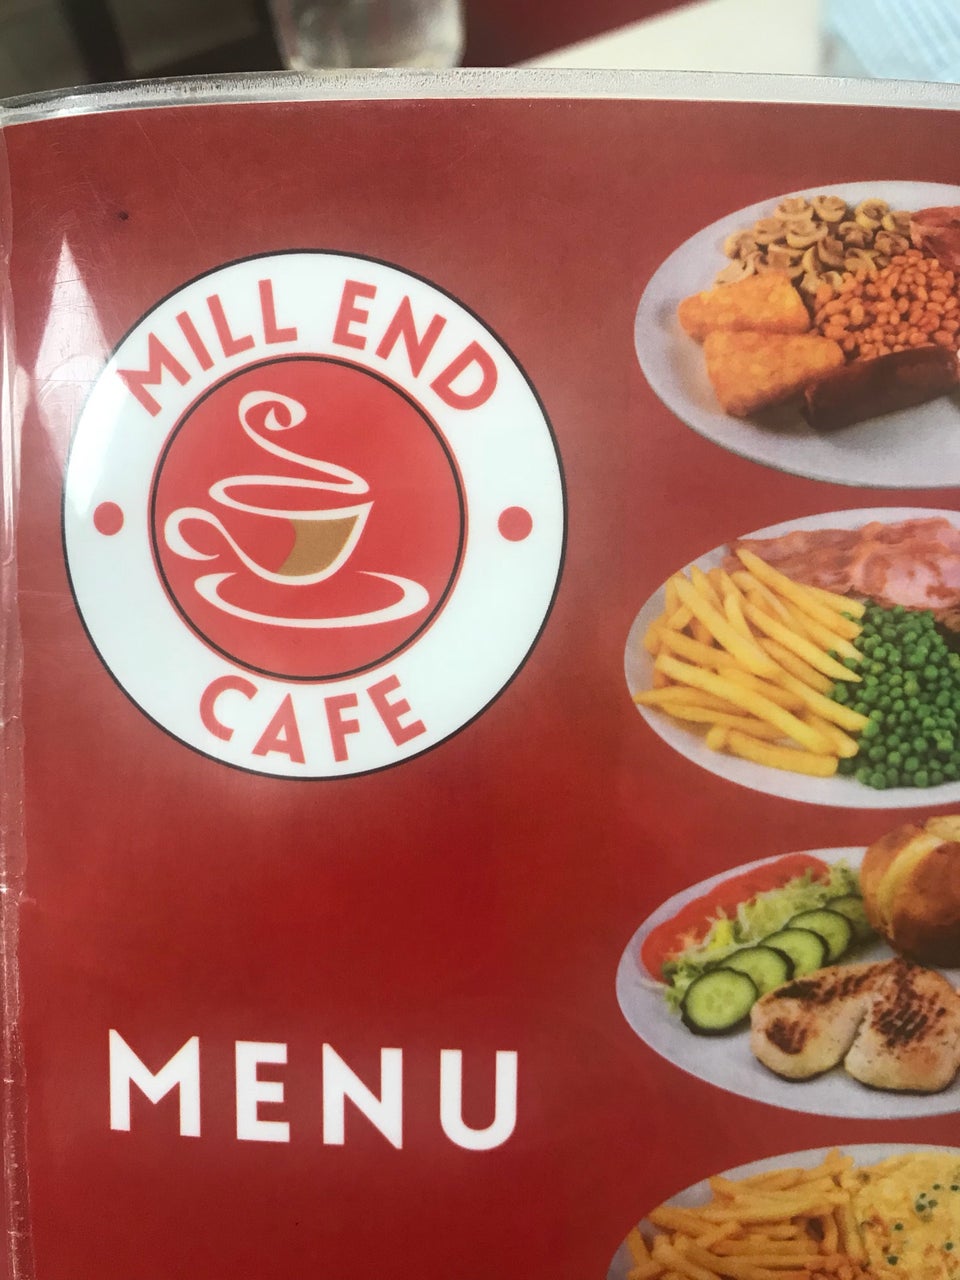 Mill End Cafe